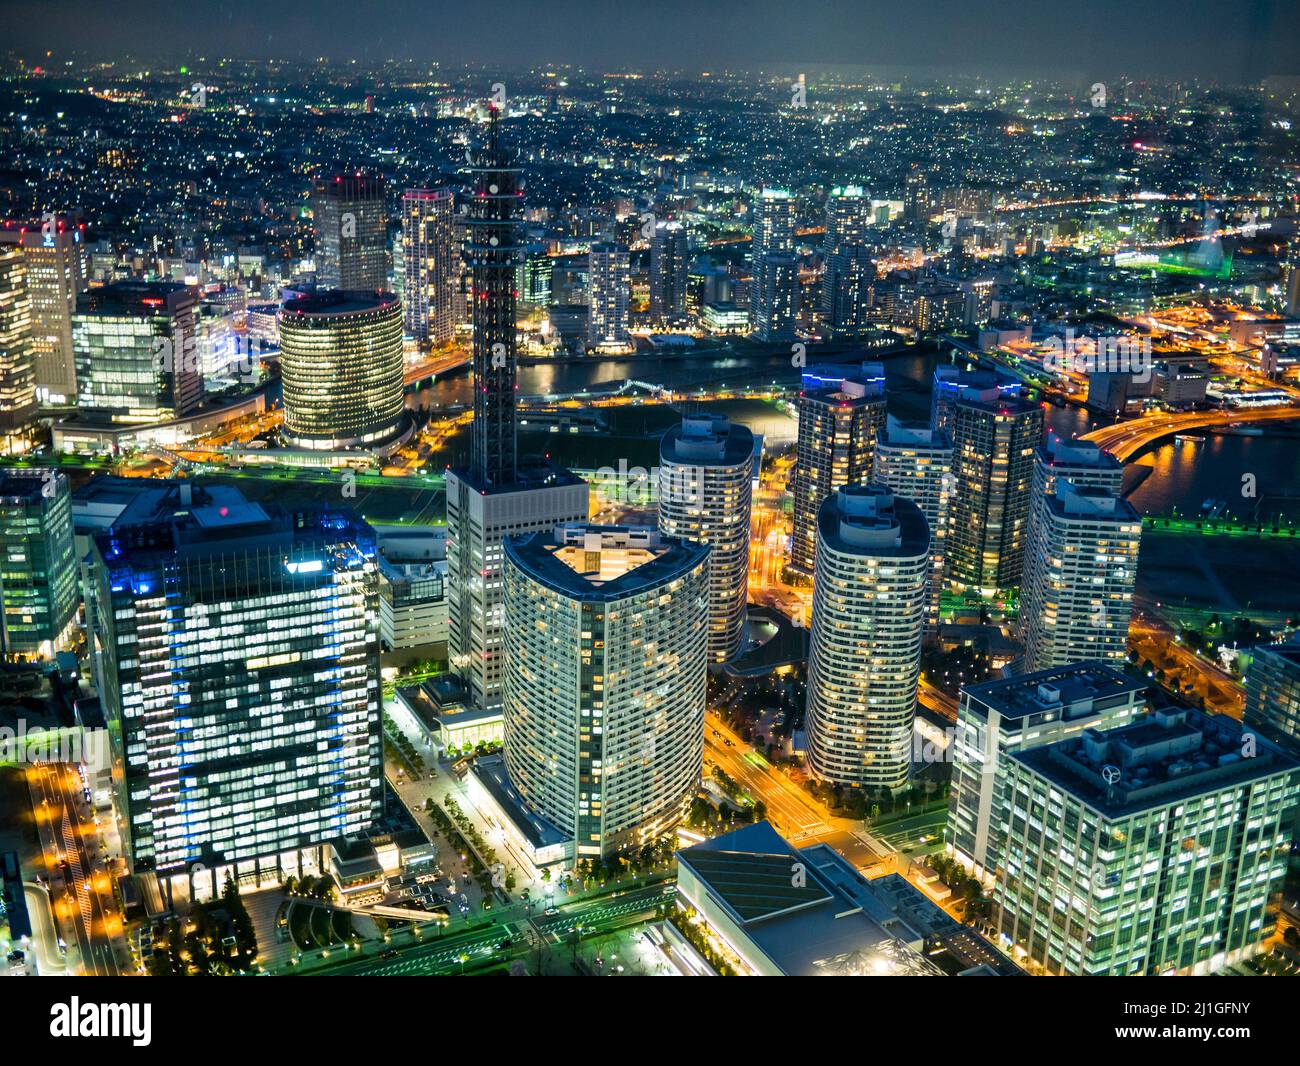 An aerial view of urbanized city with colorful cityscape and buildings of Yokohama, Japan Stock Photo